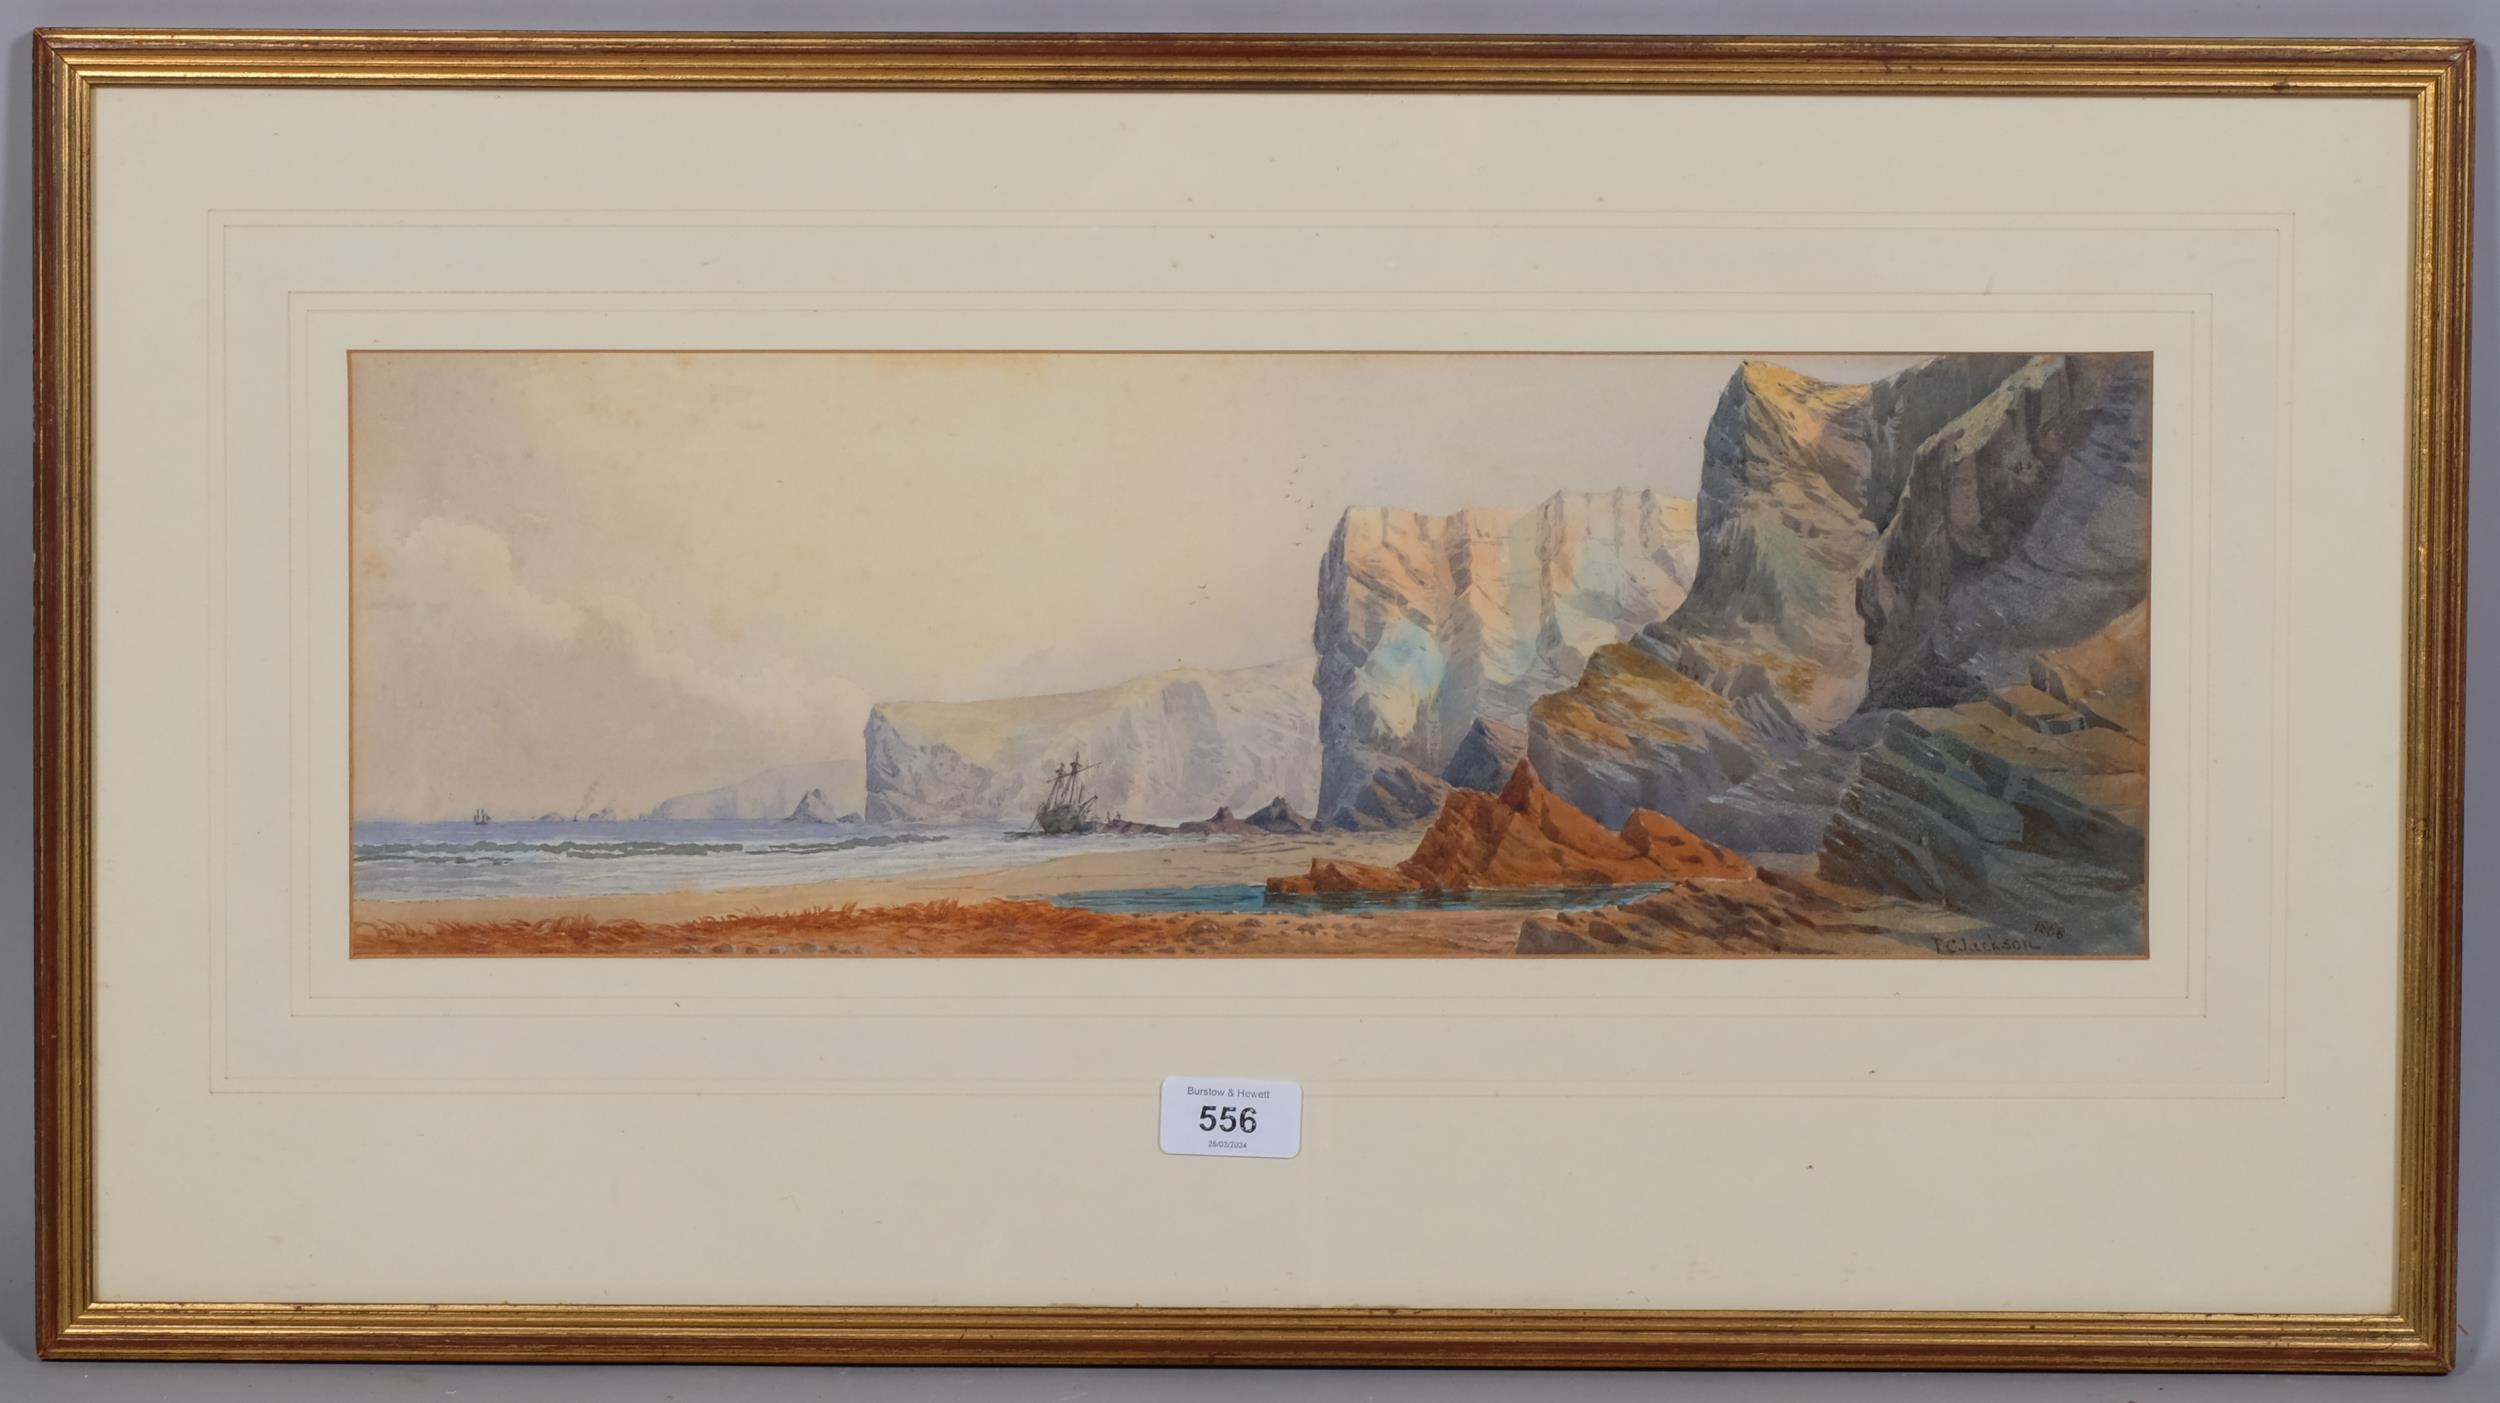 Frederick Jackson (flourished 1868 - 1884), shipwreck boat and cliffs, watercolour, signed and dated